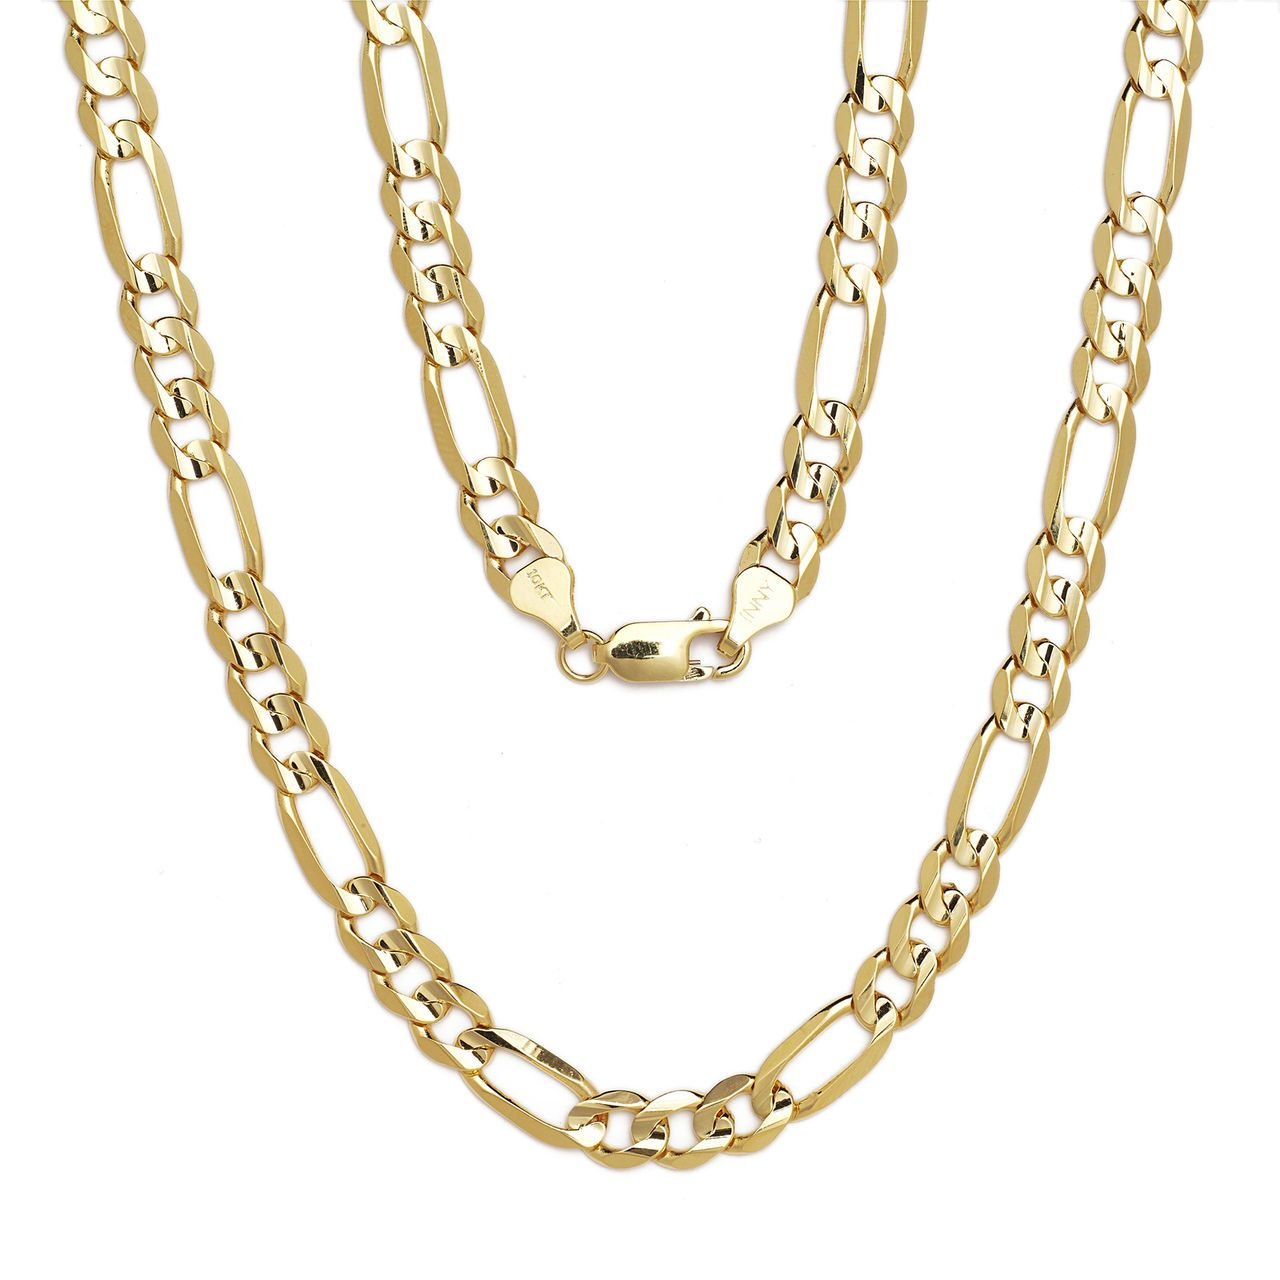 10k Yellow Gold Figaro Chain Necklace with Concave Look, 0.39 Inch (10mm)